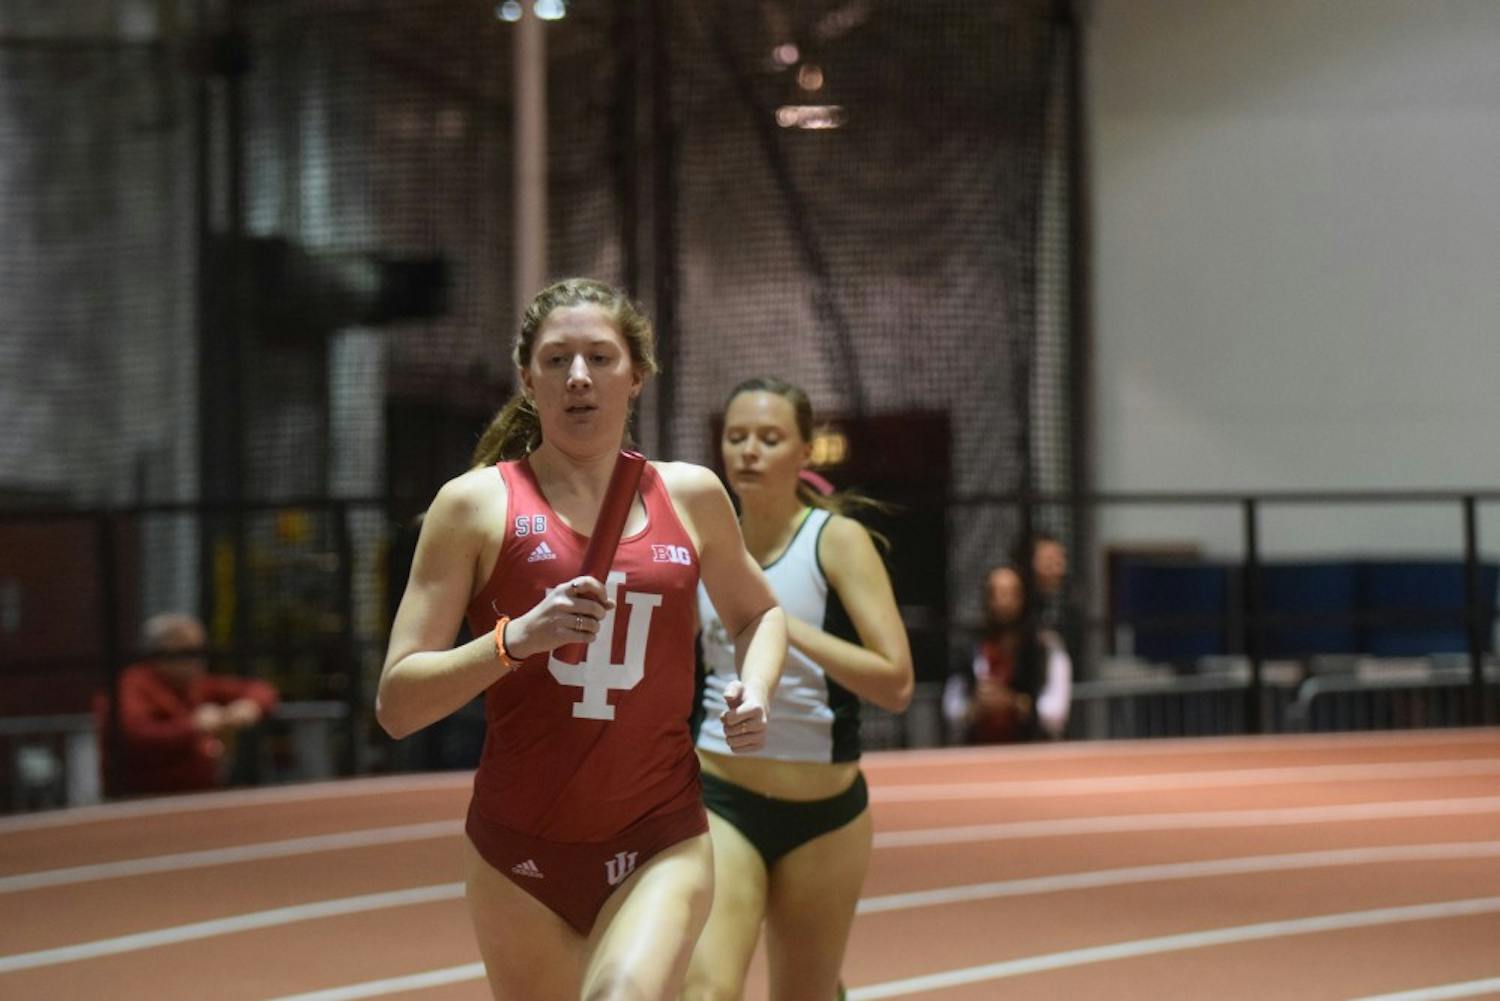 Then-sophomore distance runner Kelsey Harris, now a junior, runs the first leg of the distance medley relay in the Hoosier Hills Invitational on Feb. 10, 2016, in Harry Gladstein Fieldhouse. Harris is currently ranked 8th place in the Big Ten for her performance of 4:26.19 at the Florida Relays and the Stanford Invitational this past weekend.&nbsp;